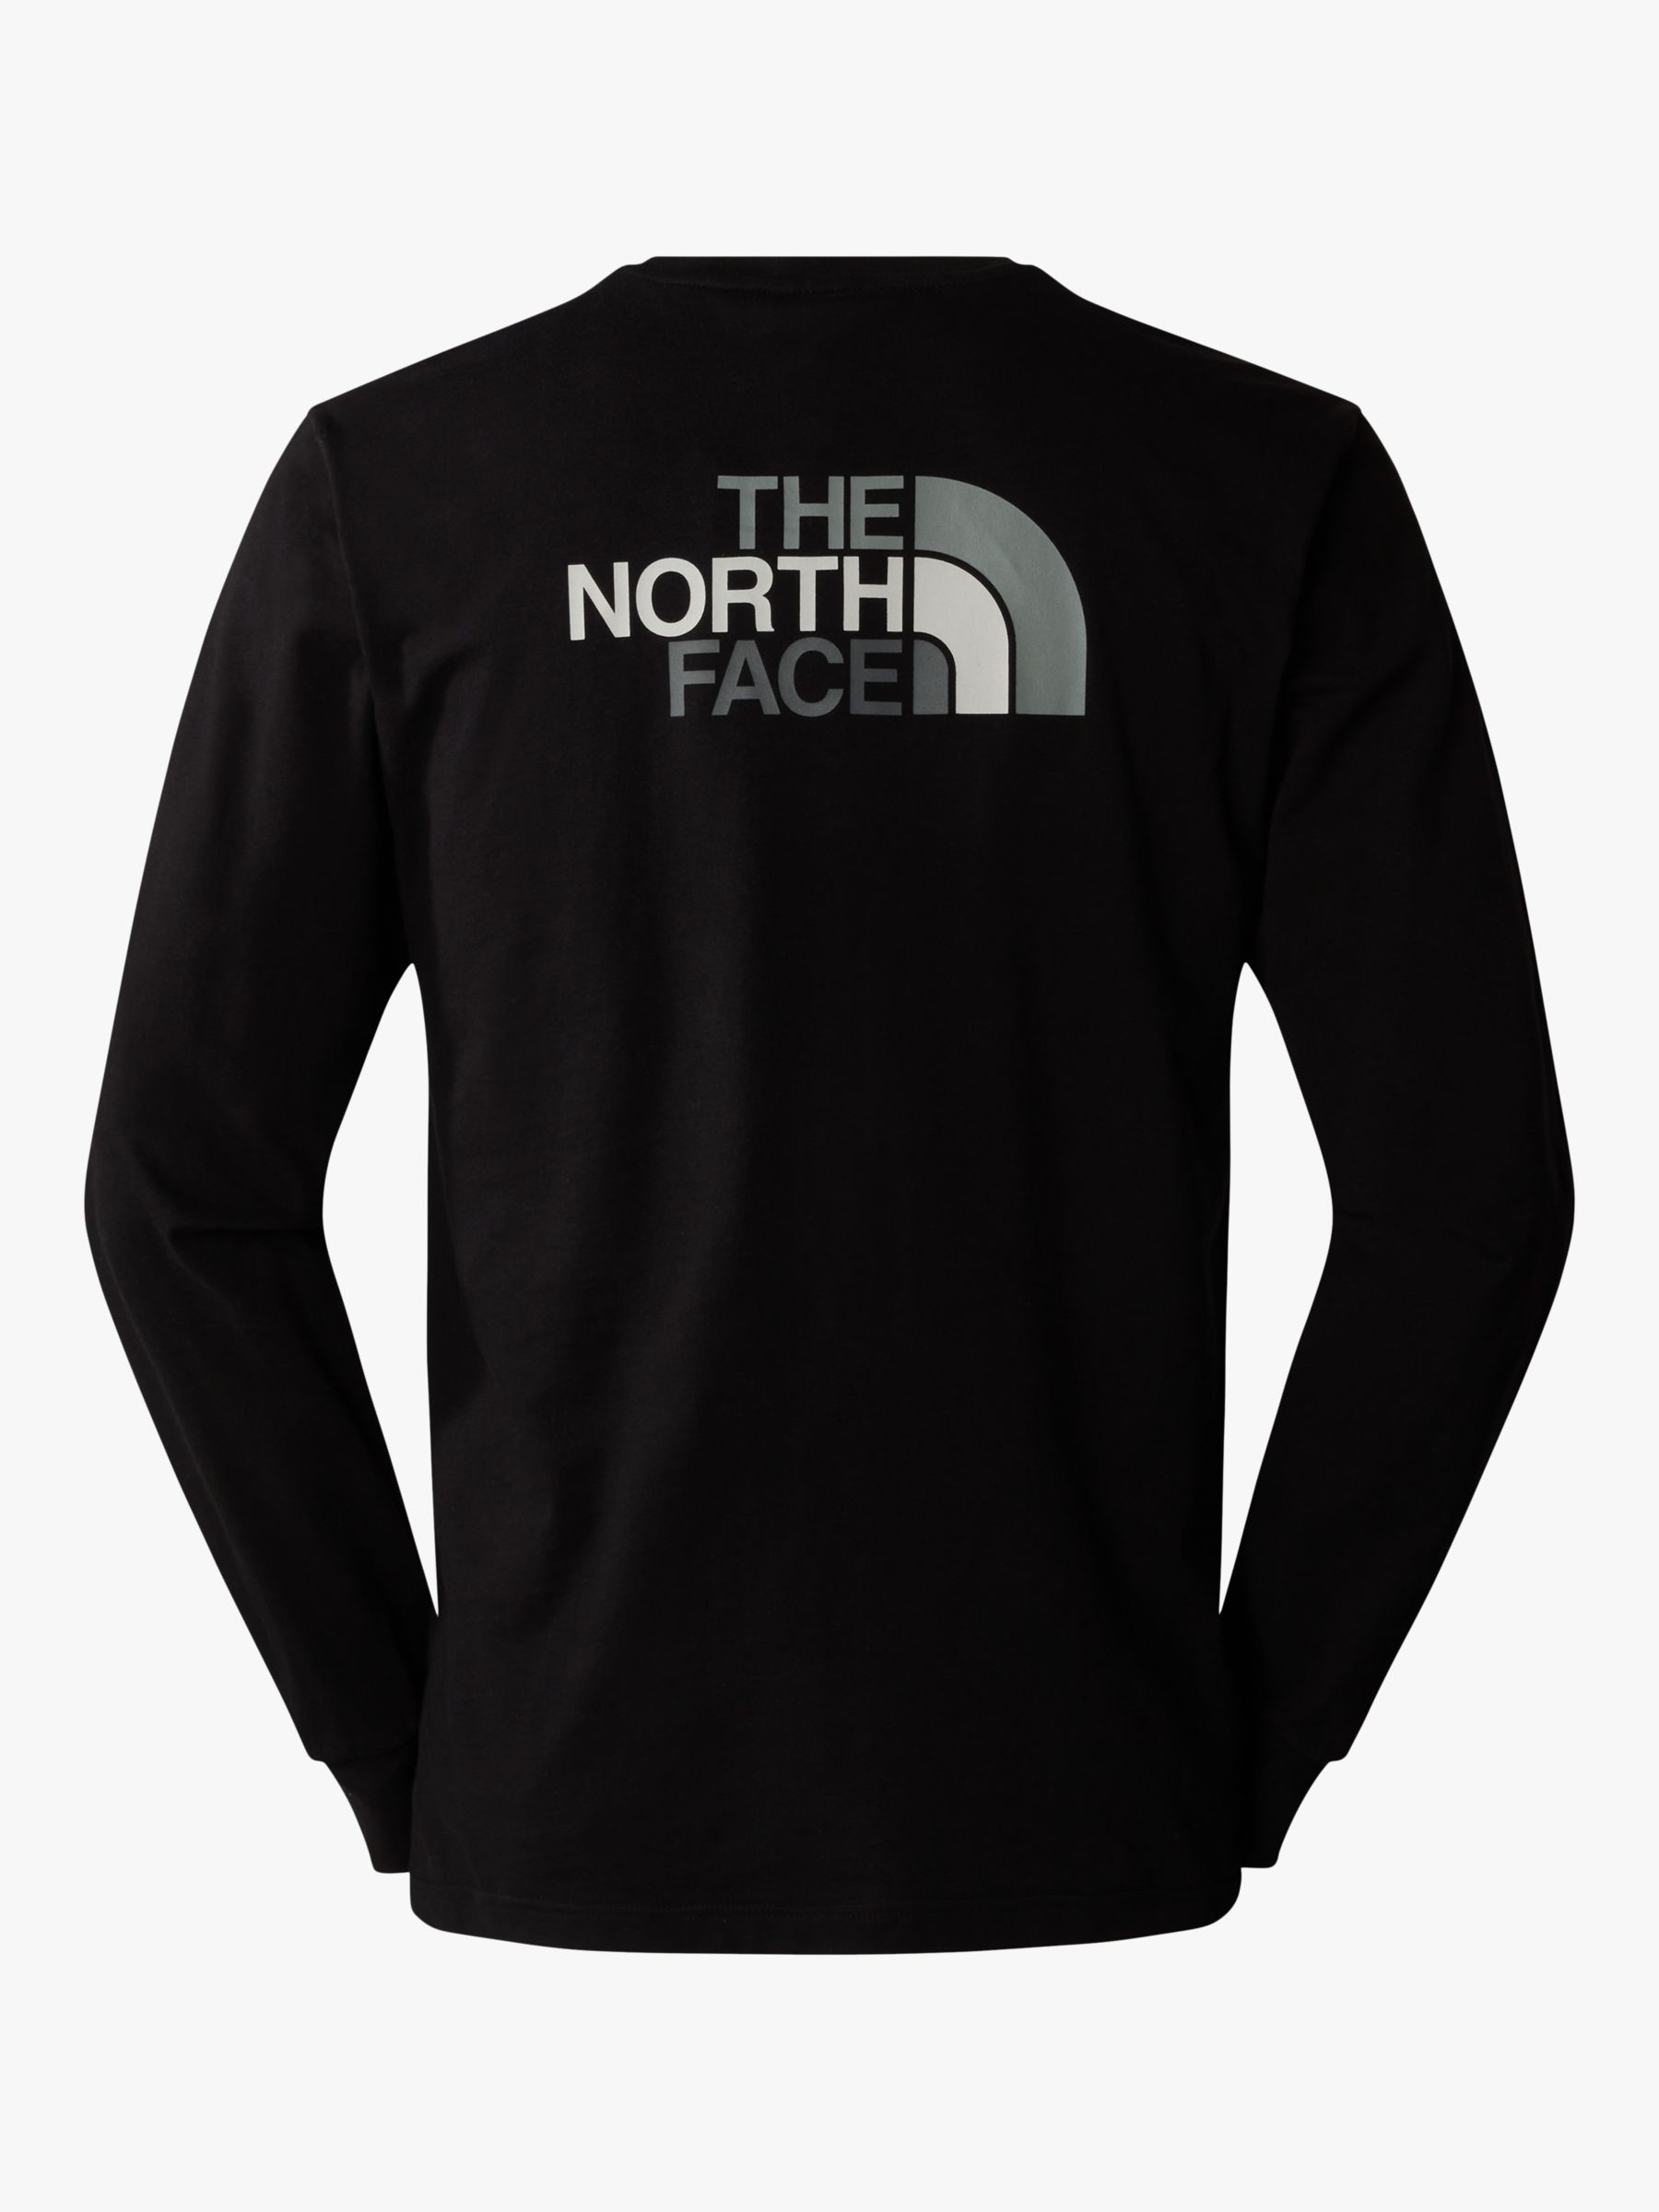 The North Face Easy Long Sleeve T-Shirt, Black, XL